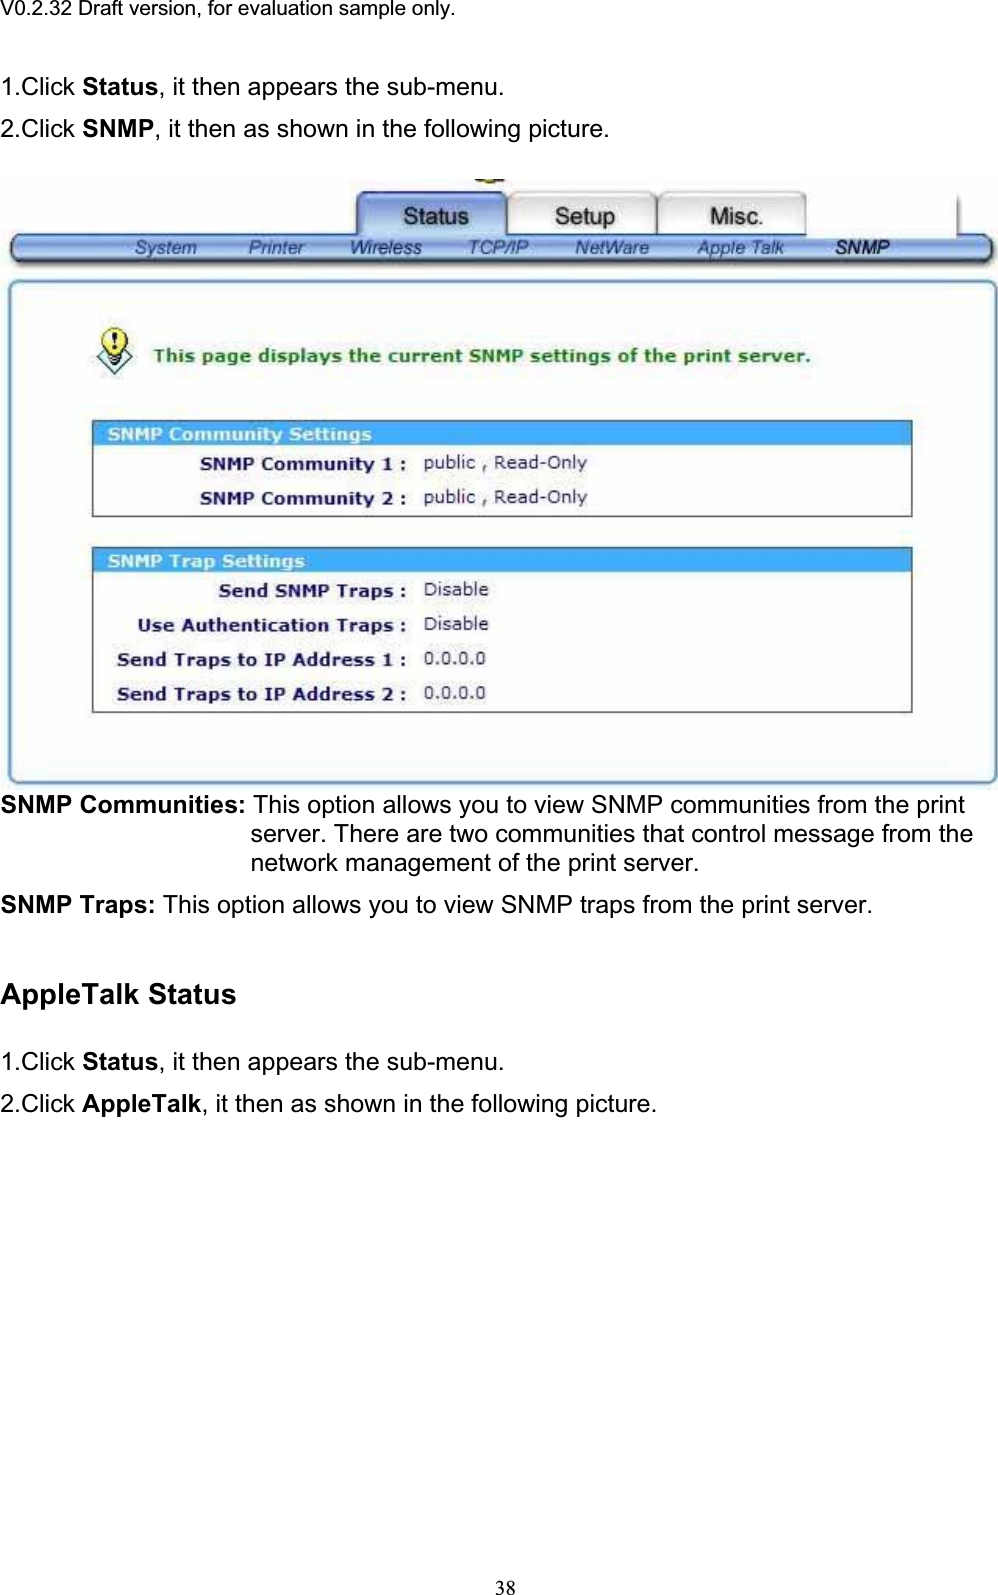 V0.2.32 Draft version, for evaluation sample only.1.Click Status, it then appears the sub-menu. 2.Click SNMP, it then as shown in the following picture. SNMP Communities: This option allows you to view SNMP communities from the print server. There are two communities that control message from the network management of the print server. SNMP Traps: This option allows you to view SNMP traps from the print server. AppleTalk Status 1.Click Status, it then appears the sub-menu. 2.Click AppleTalk, it then as shown in the following picture. 38